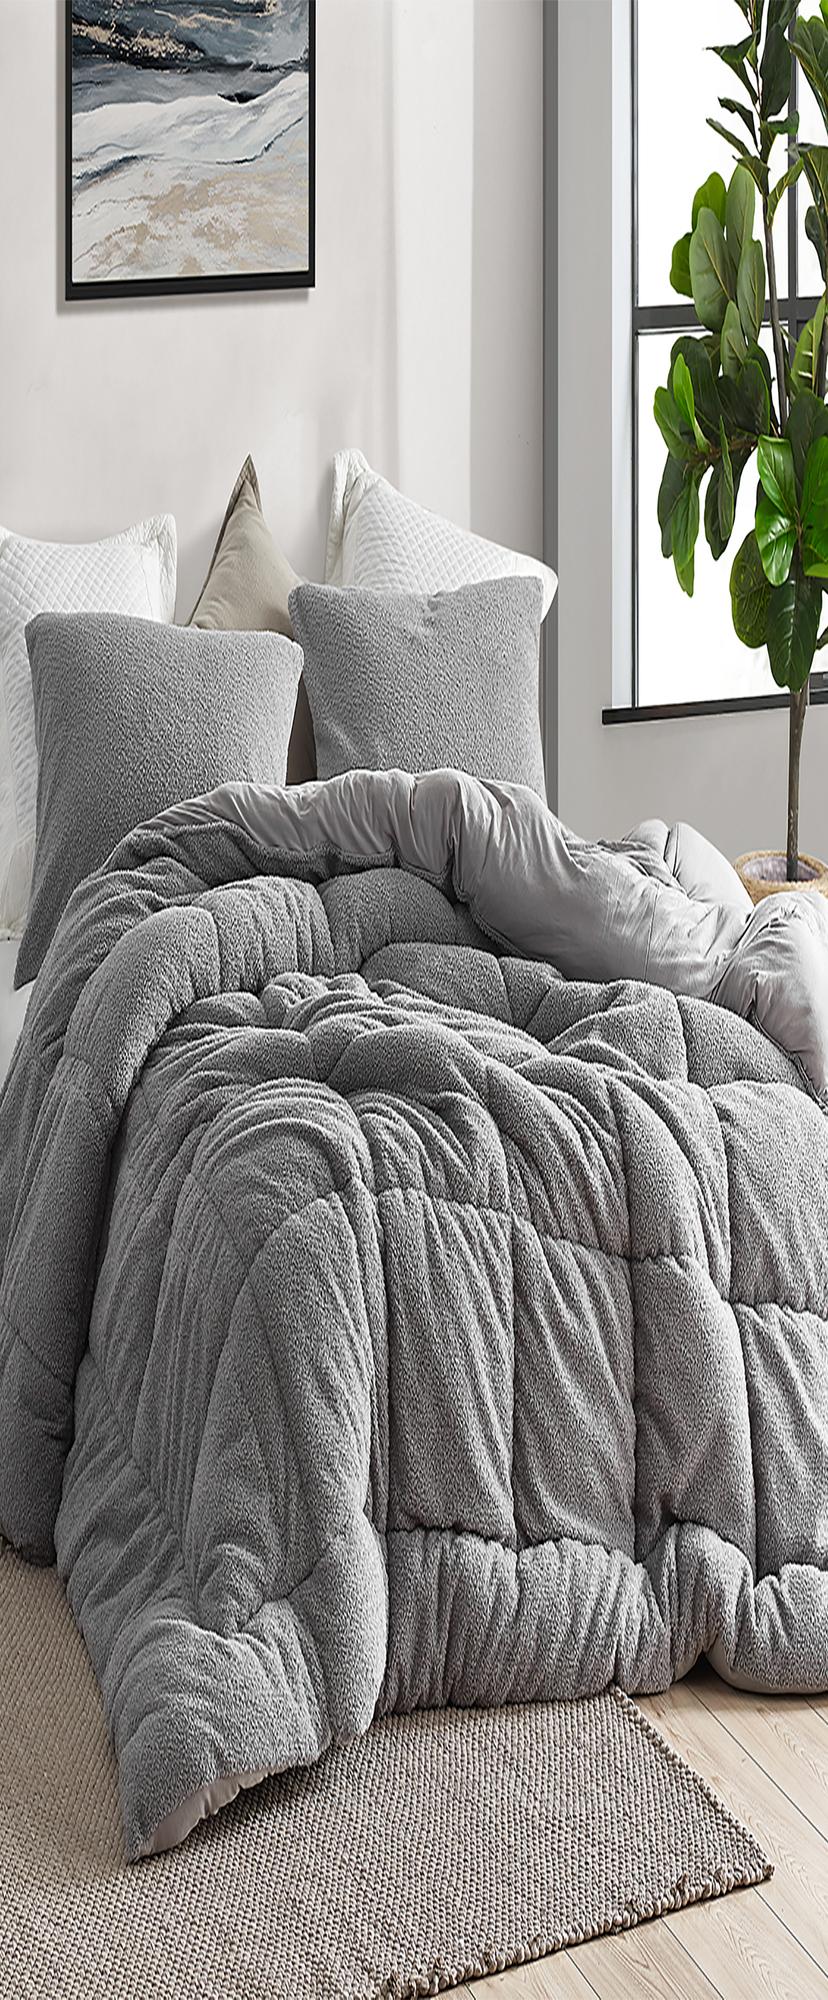 Oh Sweetie Bare - Coma Inducer® King Comforter - Alloy